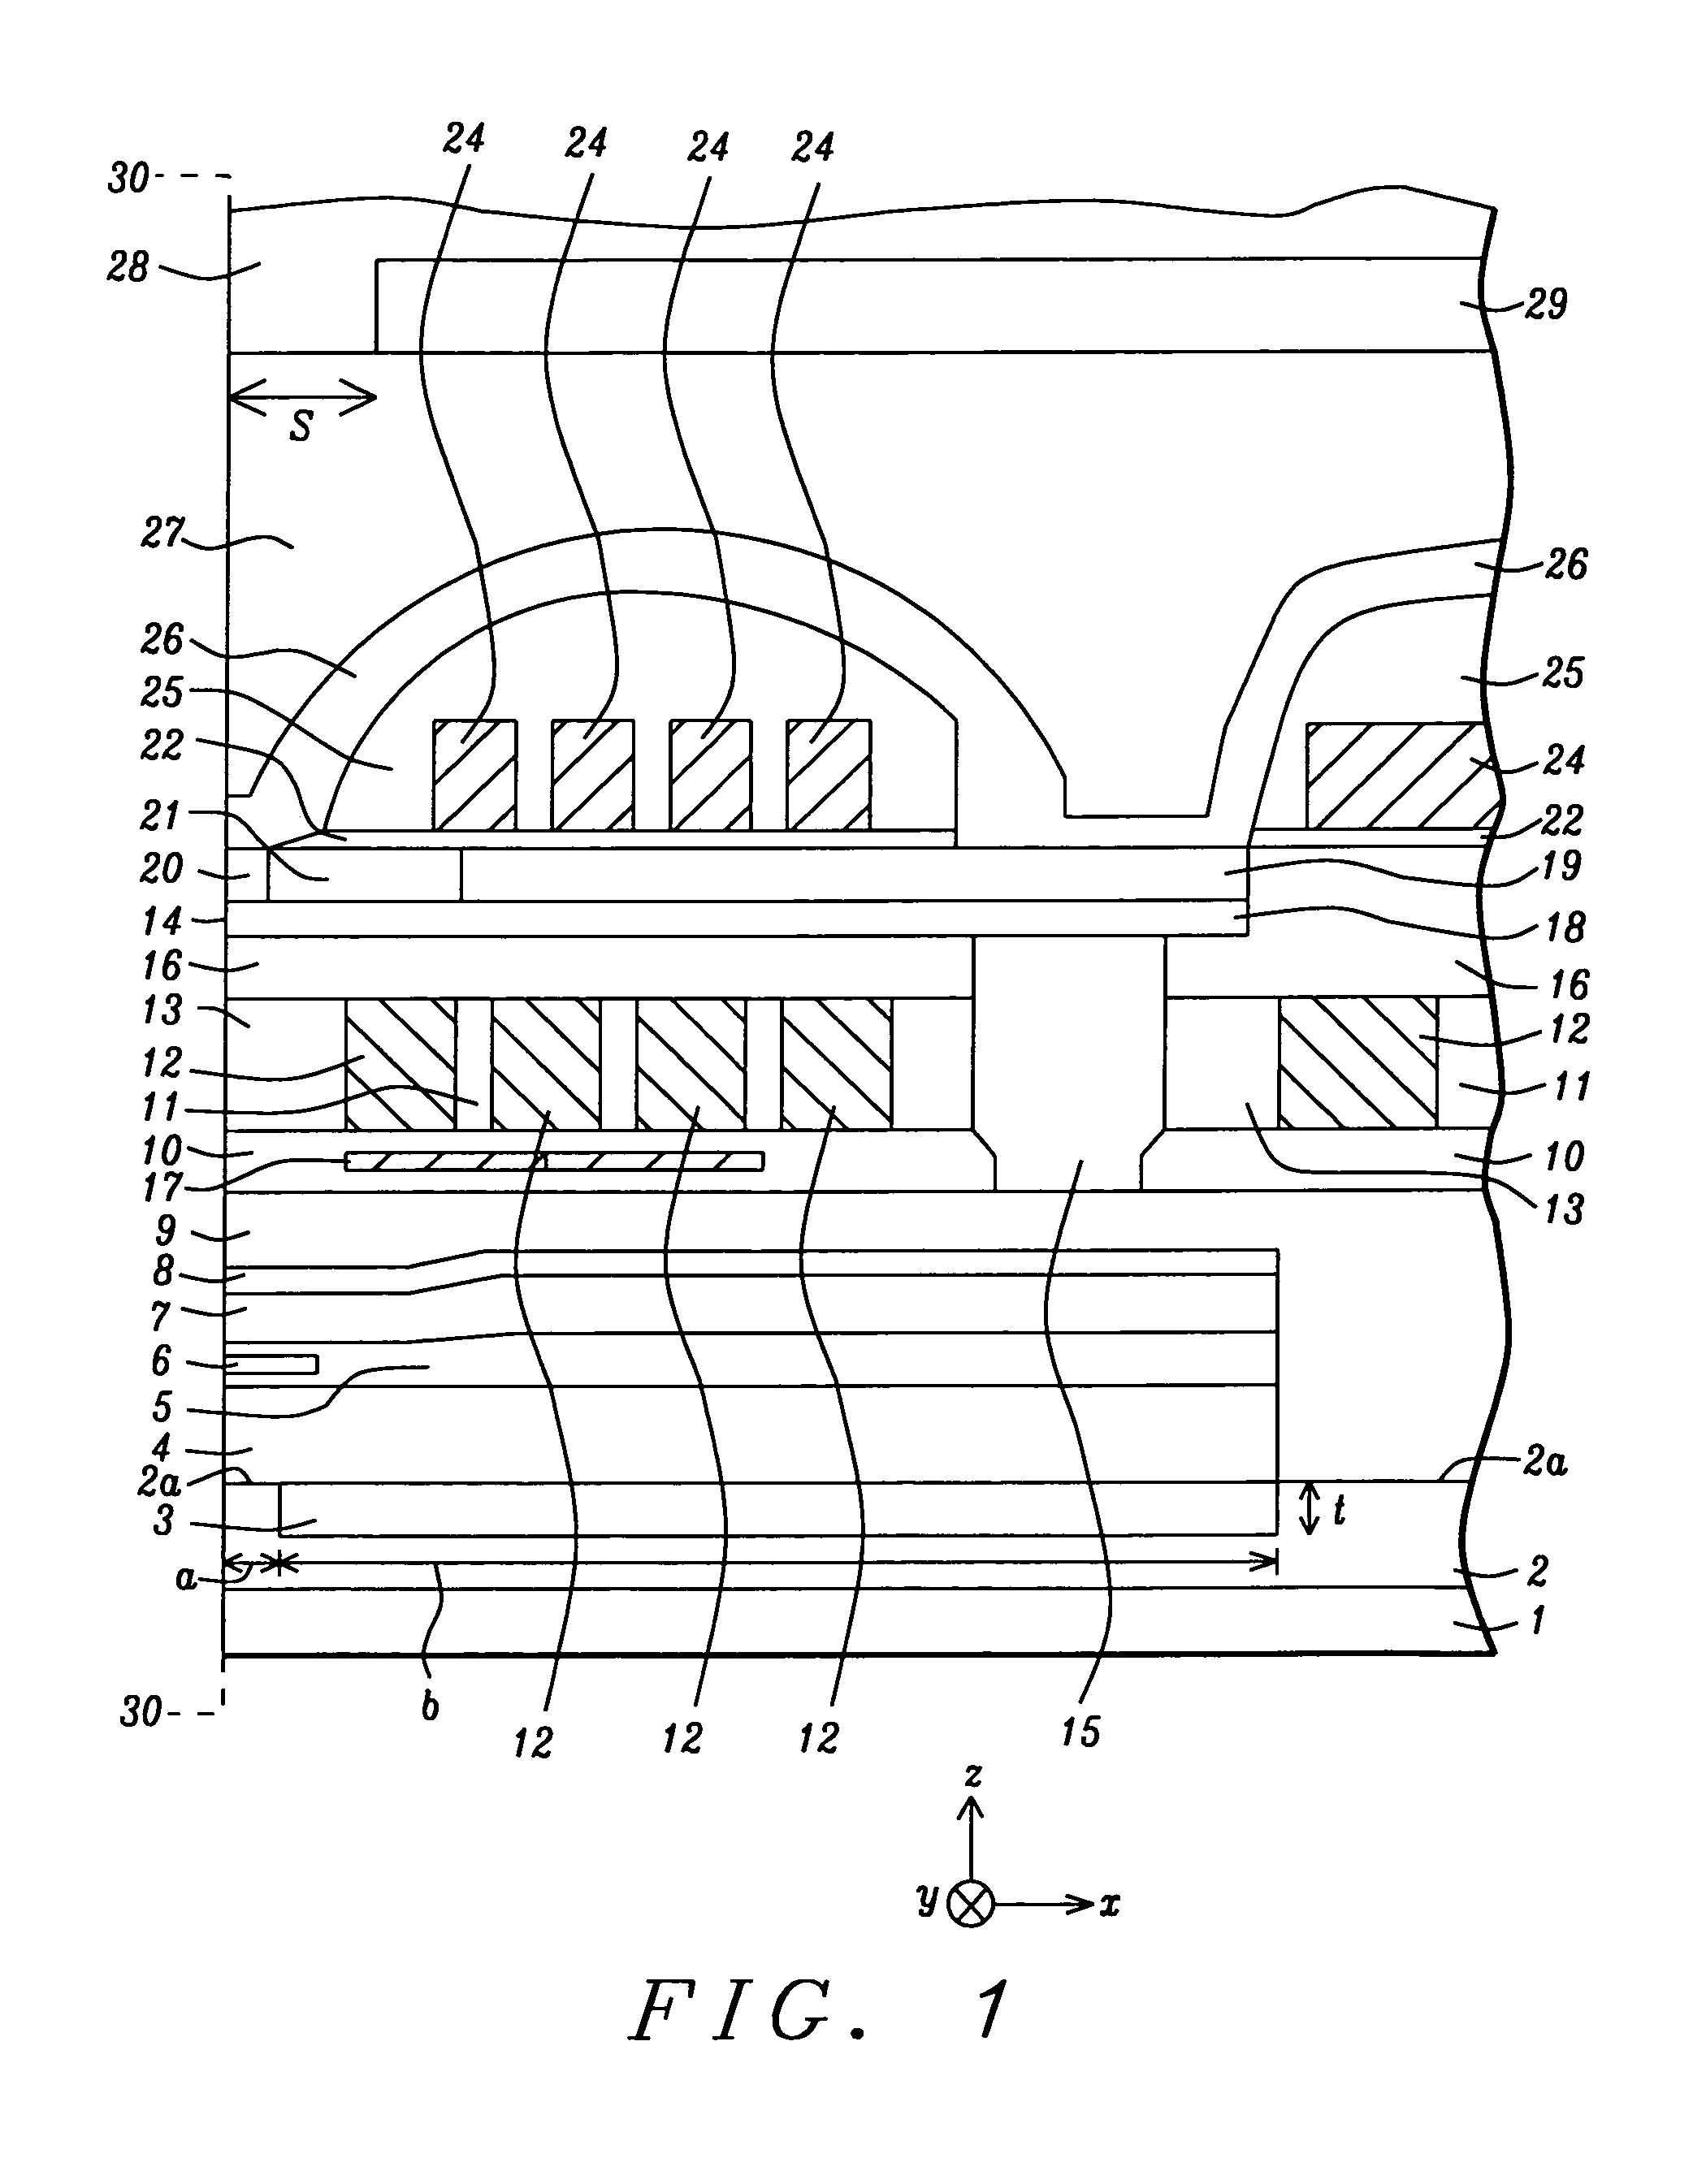 Insertion under read shield for improved read gap actuation in dynamic flying height